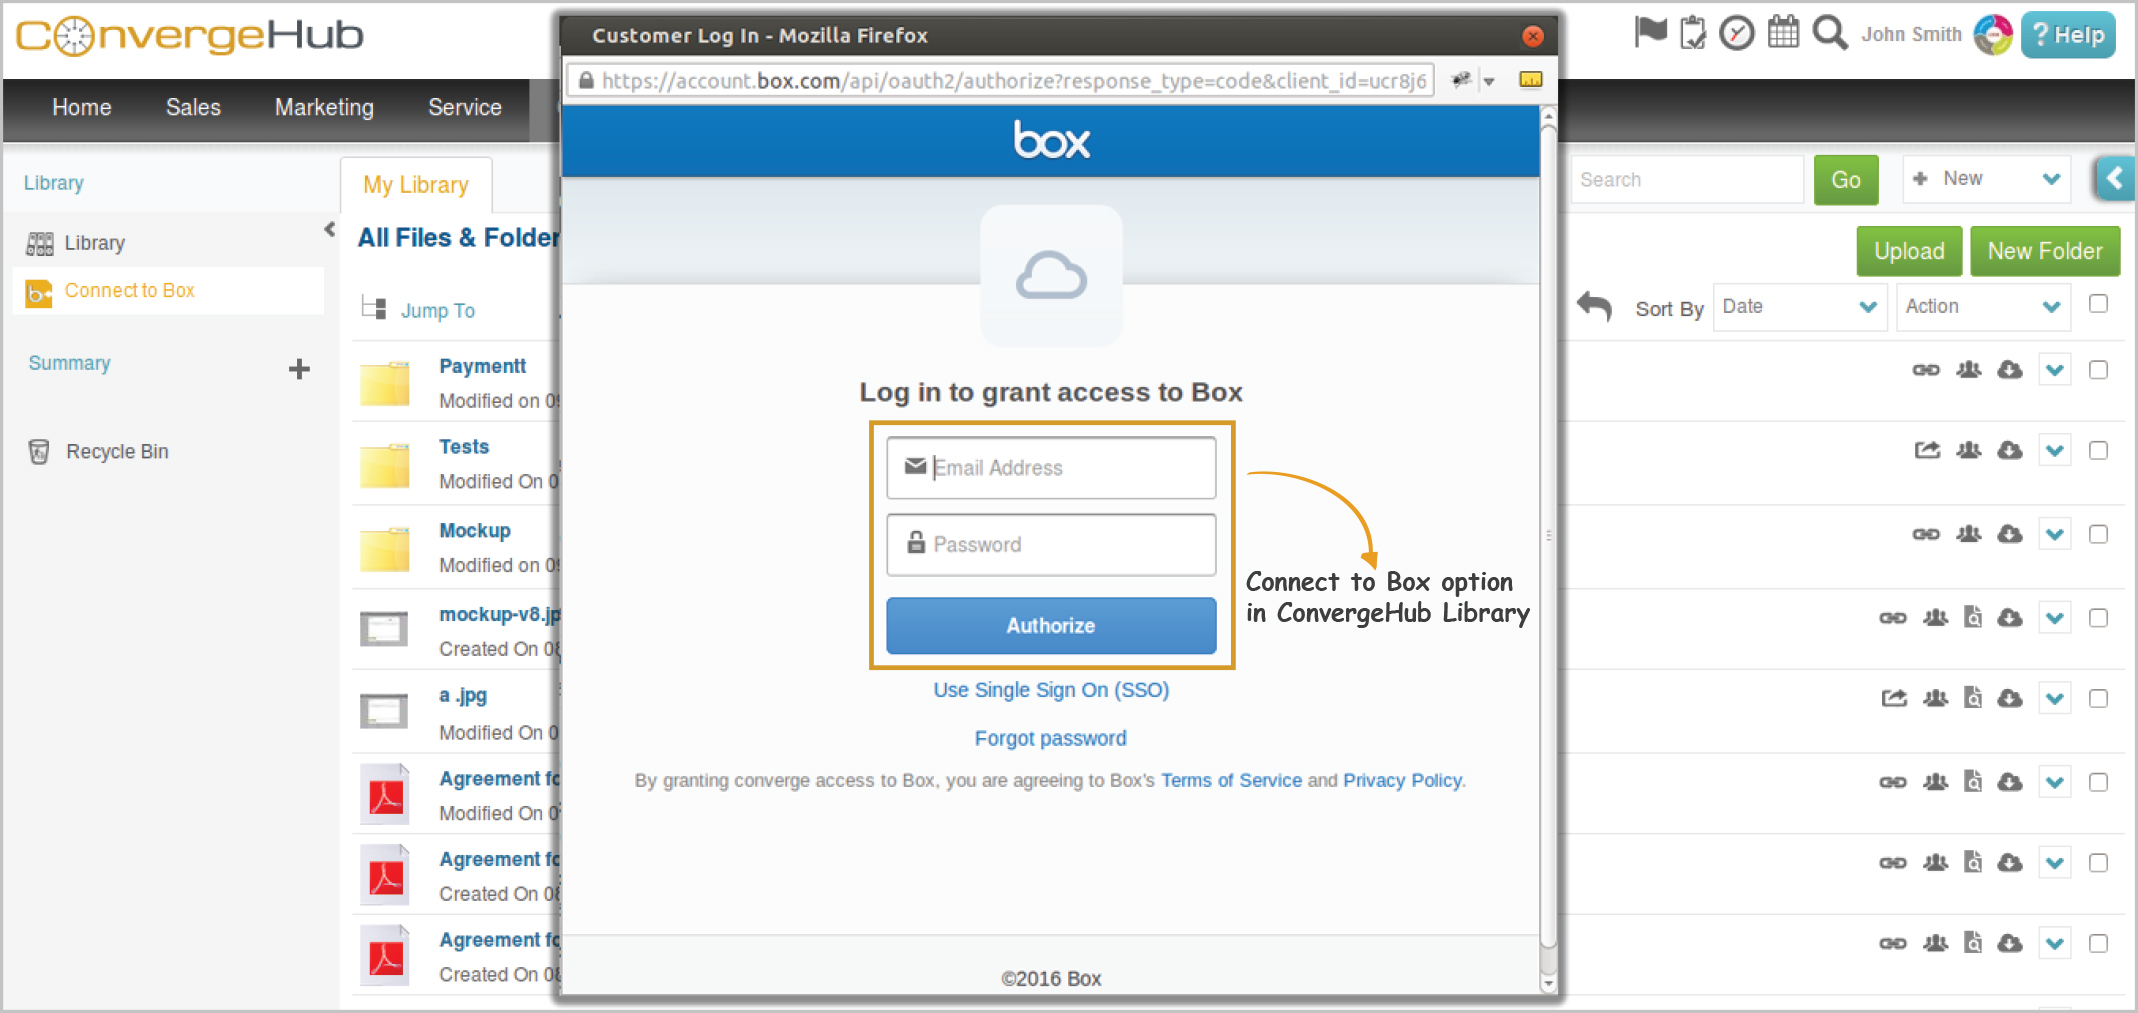 Connect to Box option in ConvergeHub Library